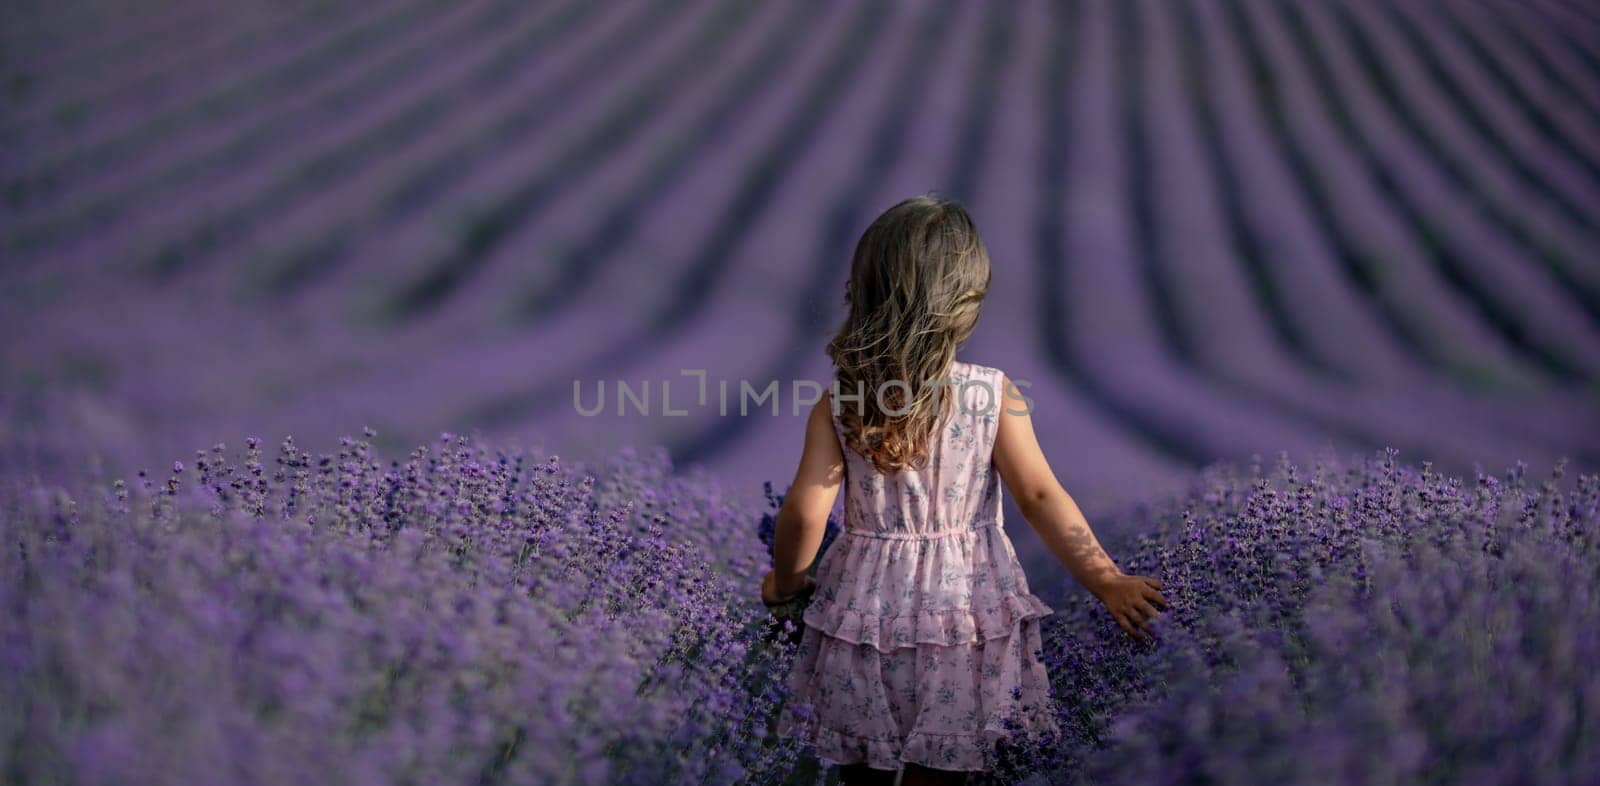 Lavender field girl banner. Back view happy girl in pink dress with flowing hair runs through a lilac field of lavender. Aromatherapy travel by Matiunina